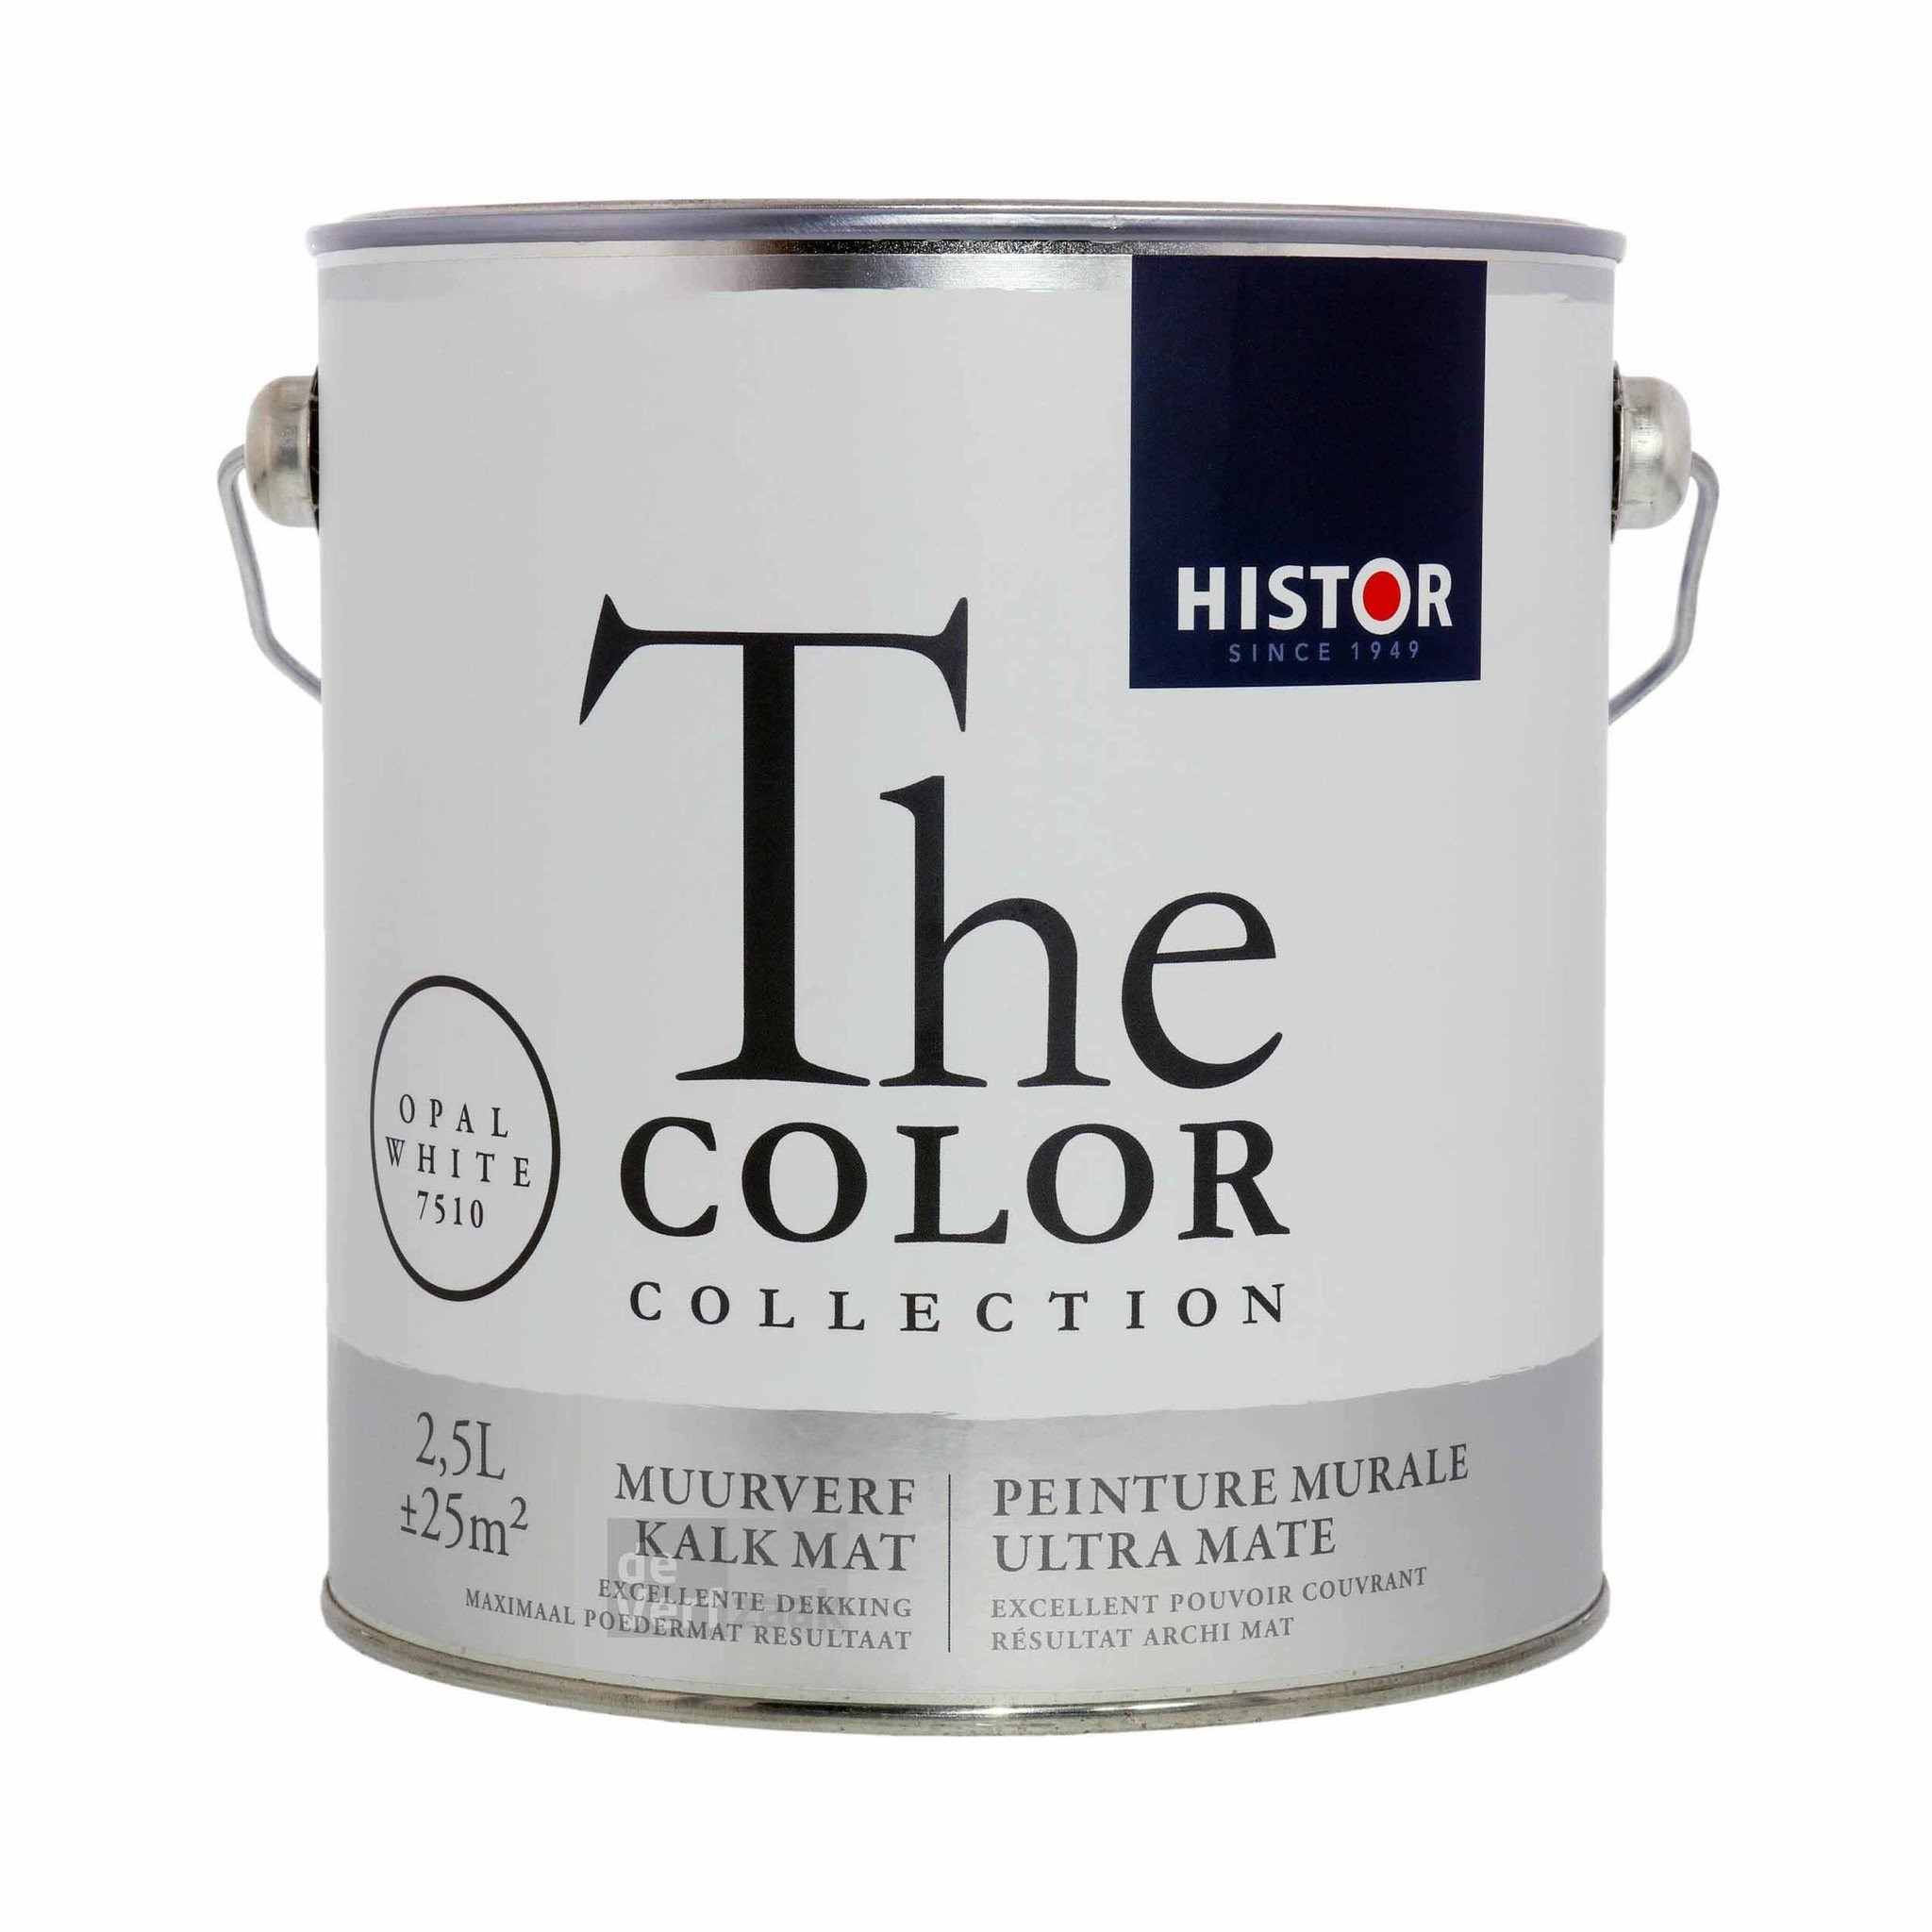 Histor The Color Collection Muurverf Kalkmat - Opal White- 2,5 liter